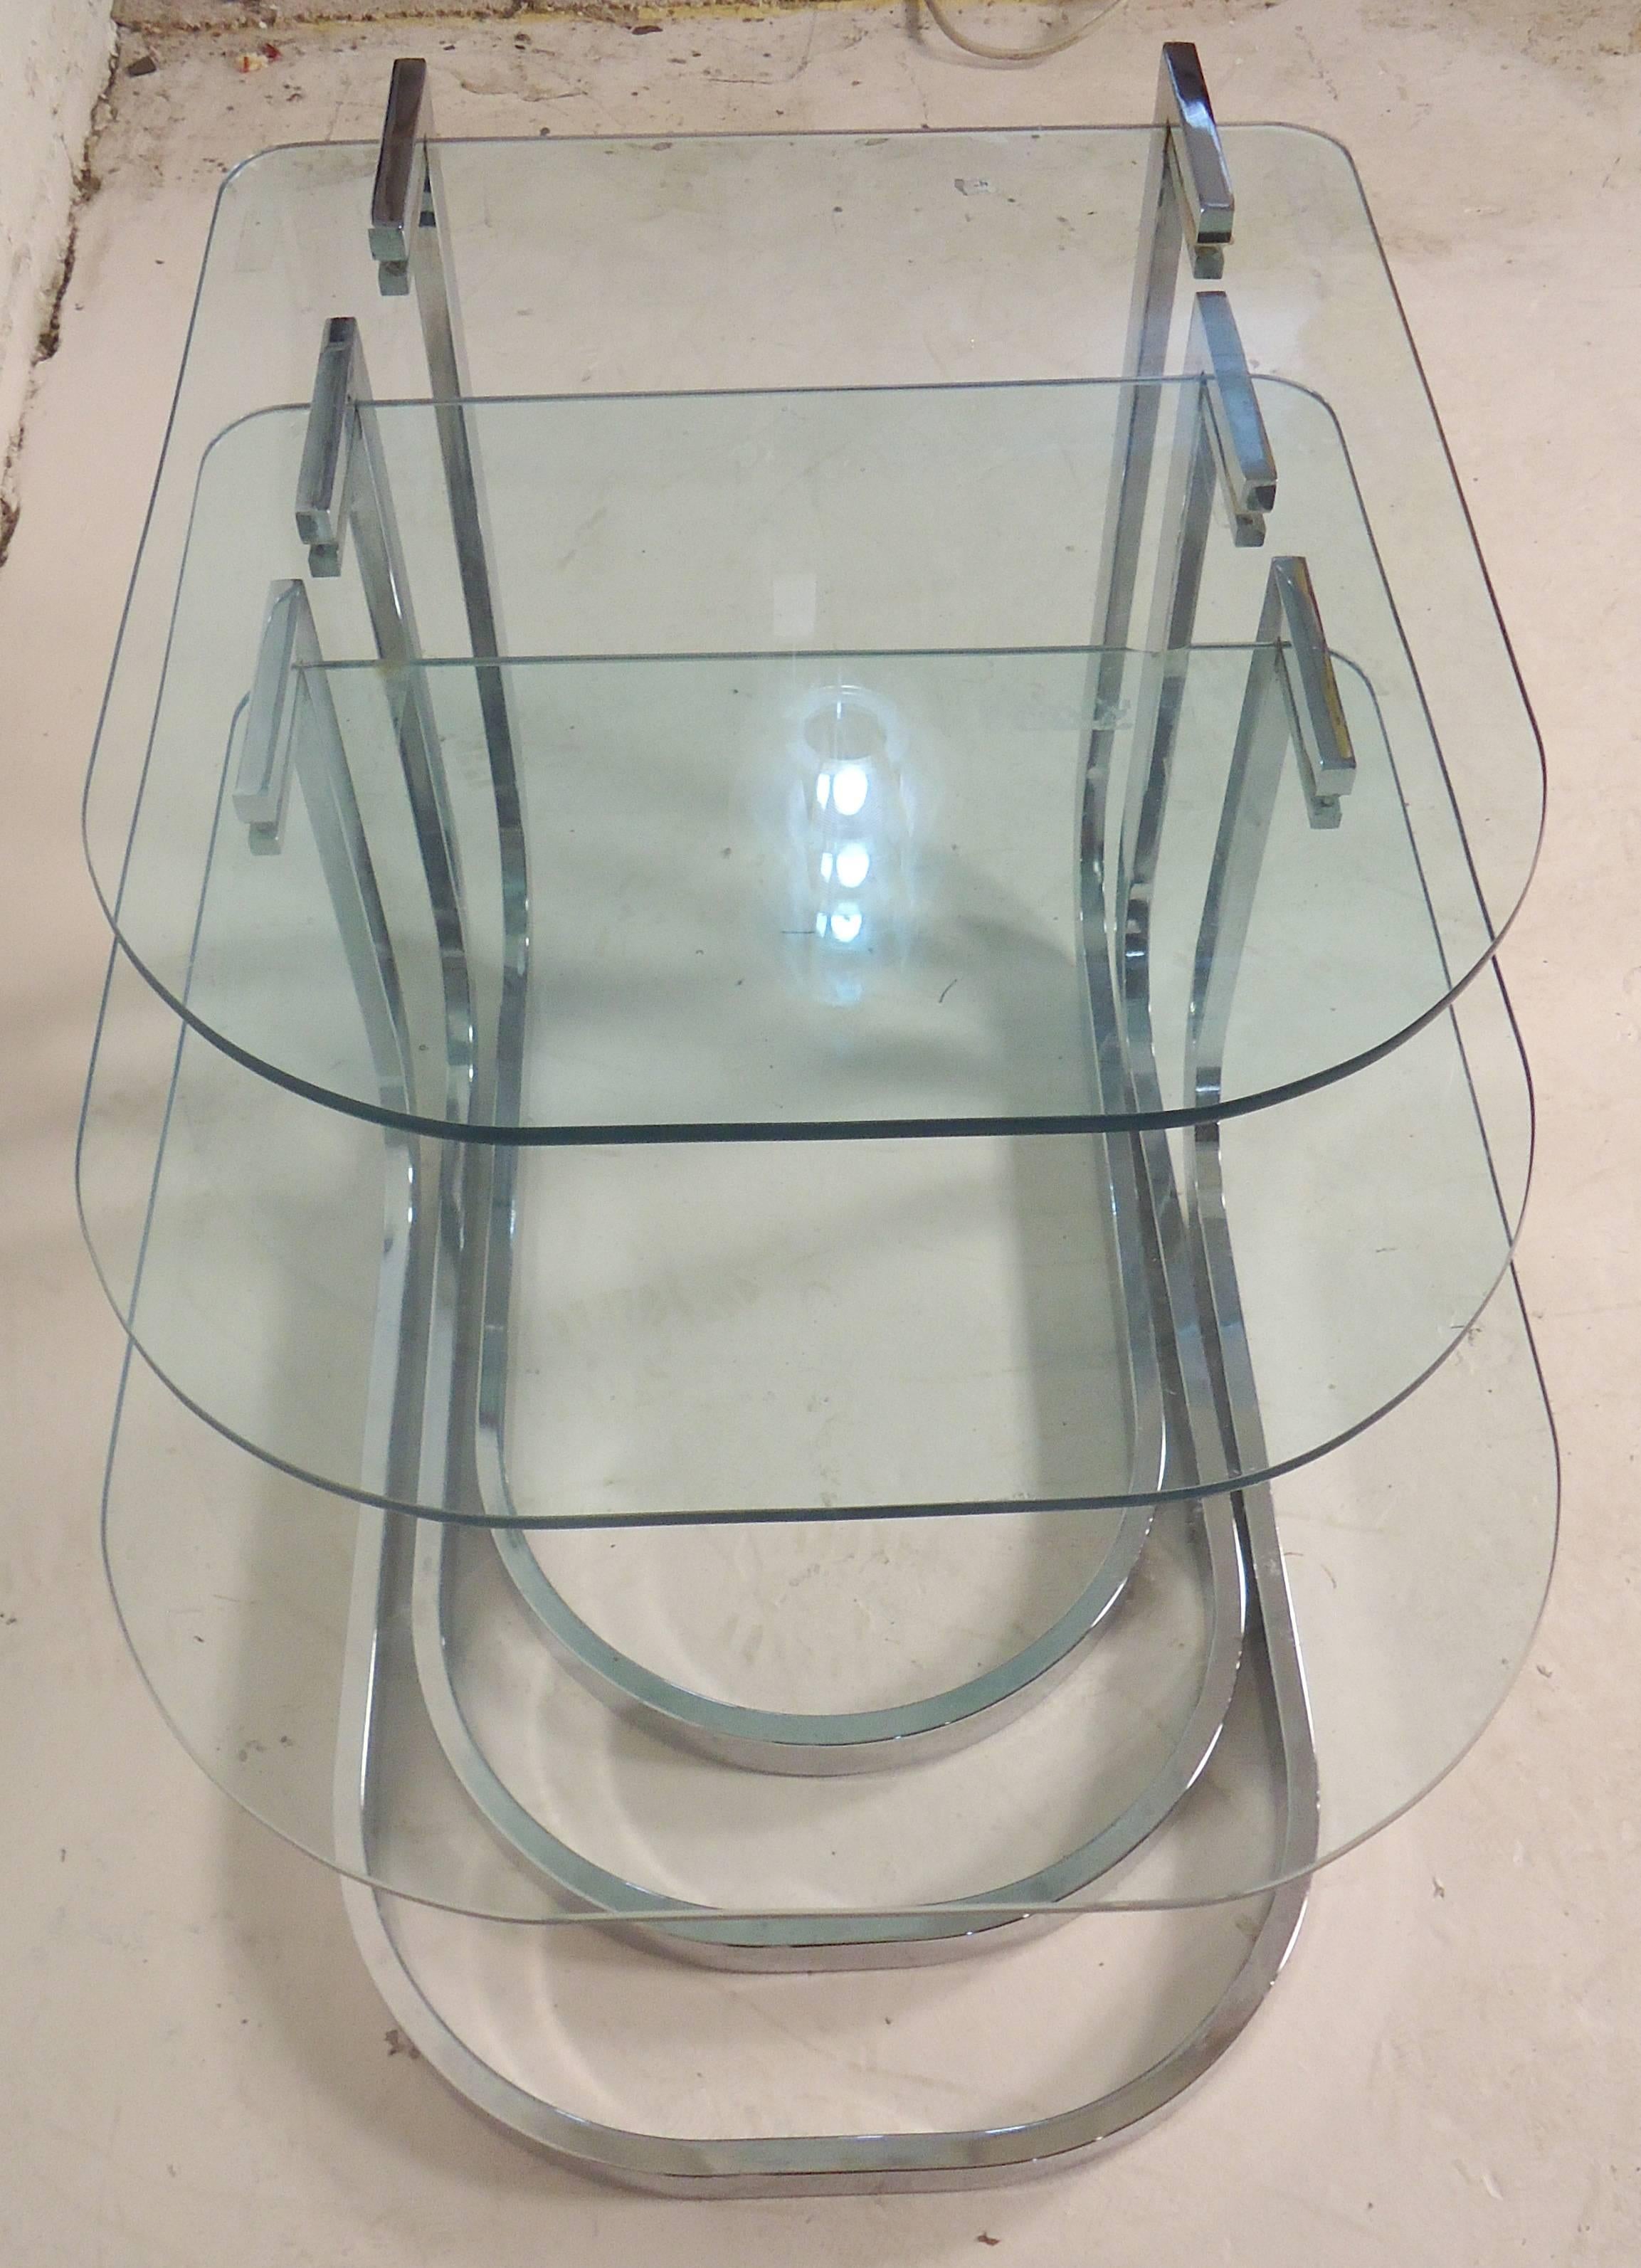 Set of three polished chrome tables with glass inserts. Mid-Century Modern shape and style.

(Please confirm item location - NY or NJ - with dealer).
 